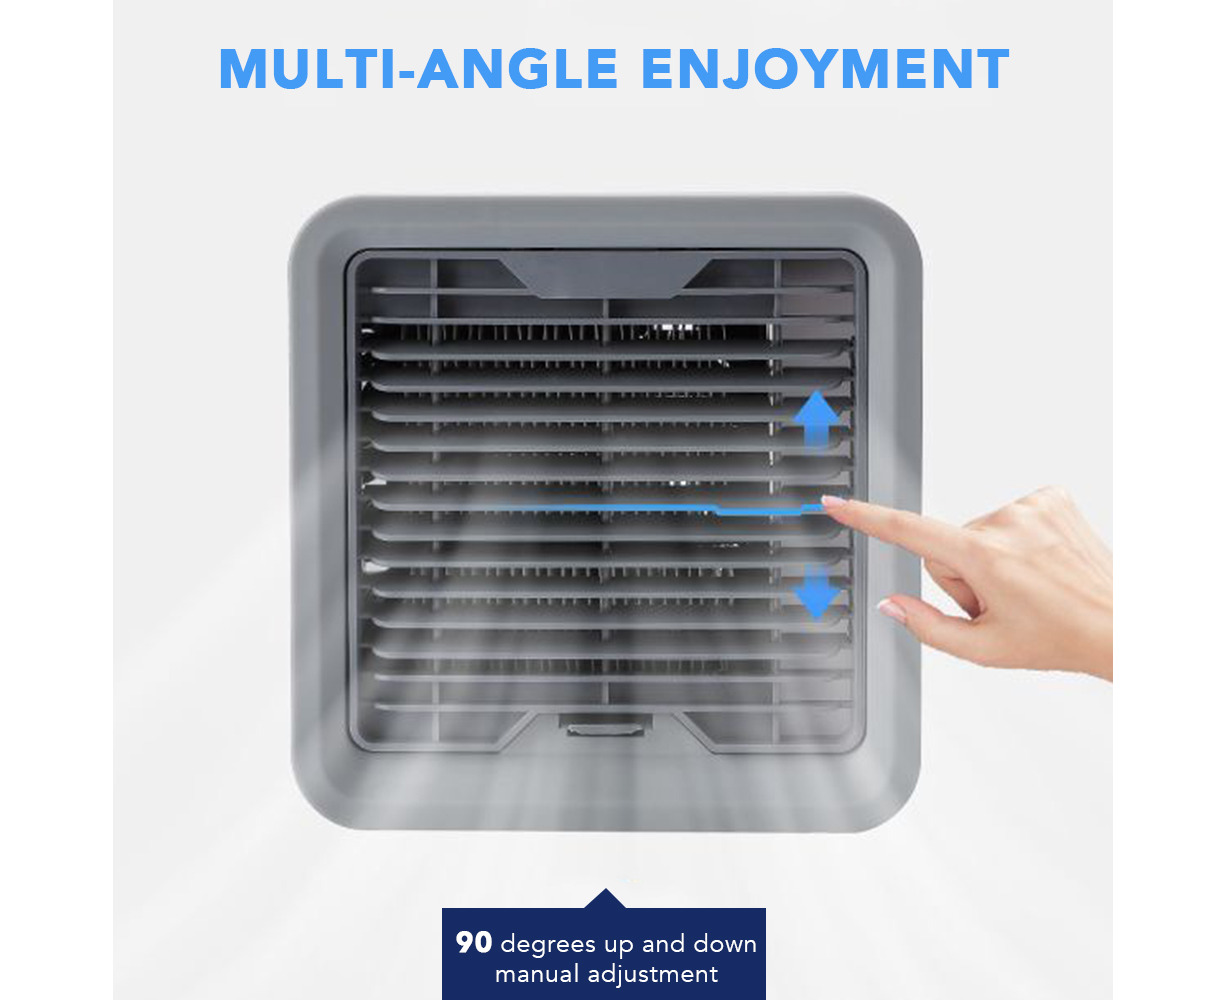 A,Free Mingfa Air Conditioner Air Cooler Portable LED Air Conditioner Small USB Desktop Cooling Fan Built-in Ice Box for Home Office 